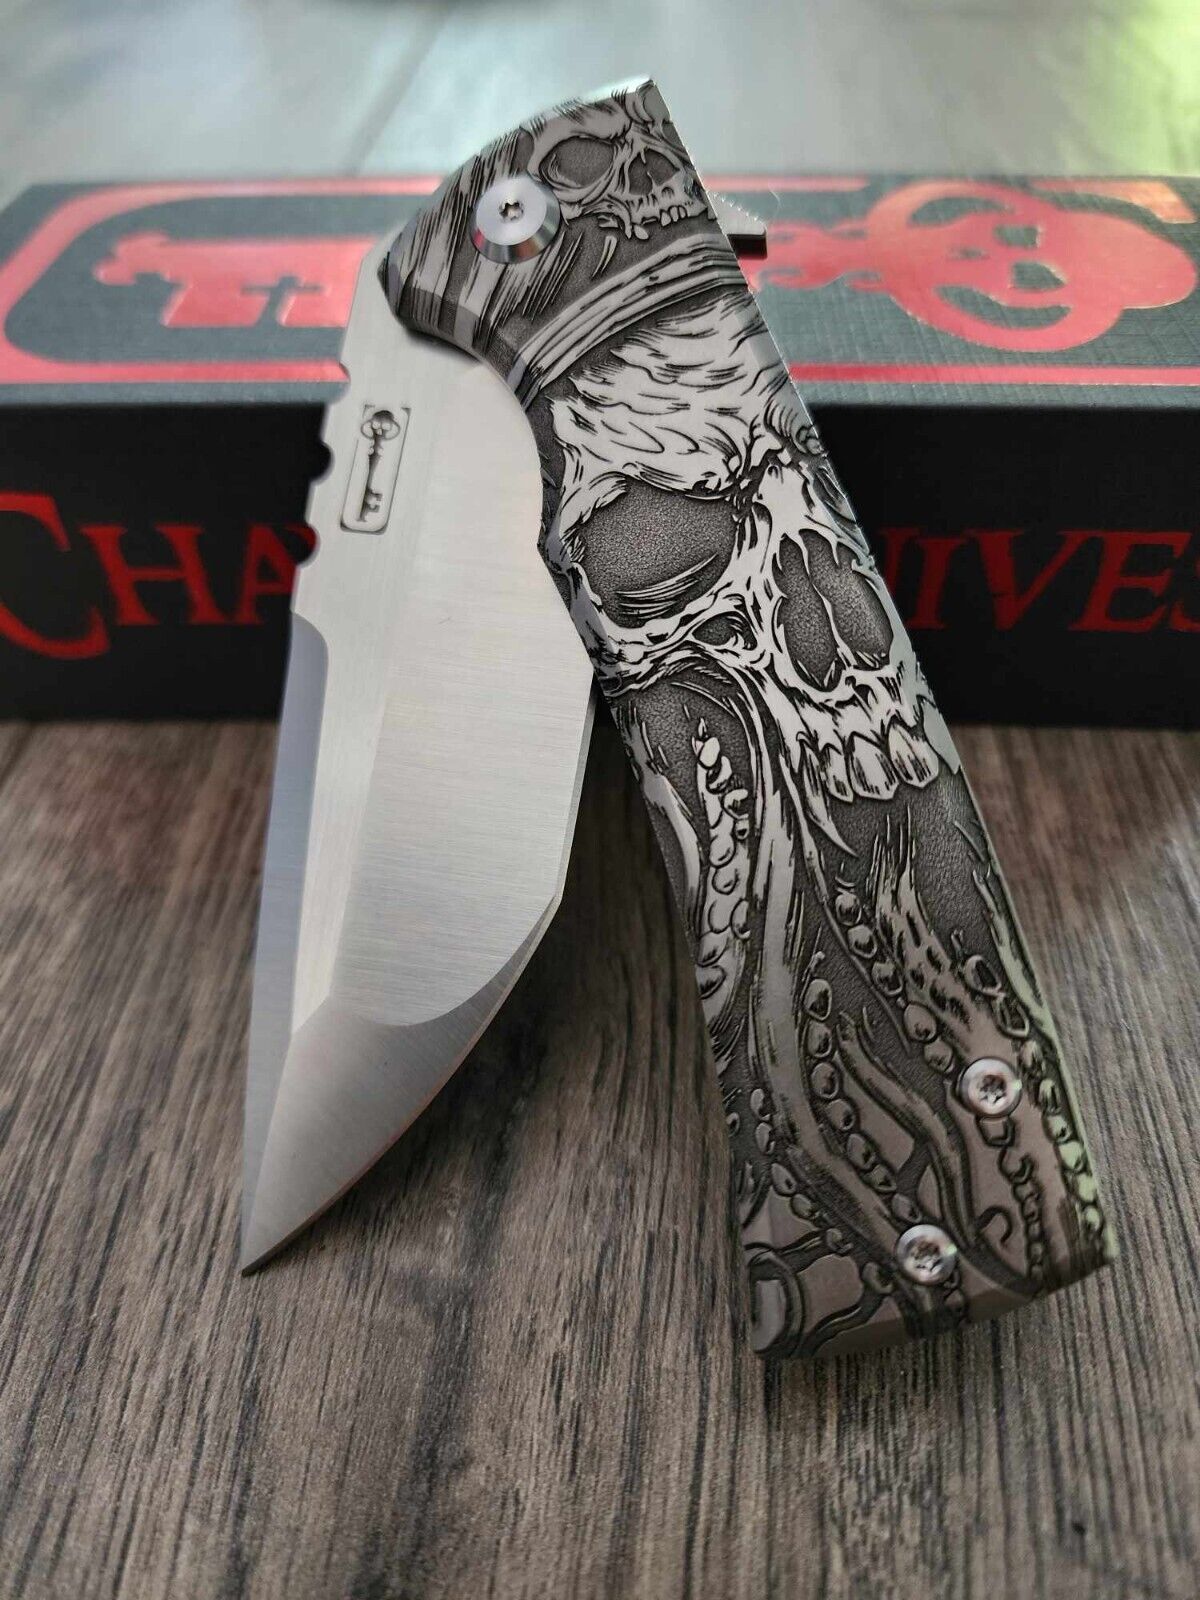 Chaves Knives Relief Engraved 229 Redencion With Davy Jones Skull - M390 - EDC